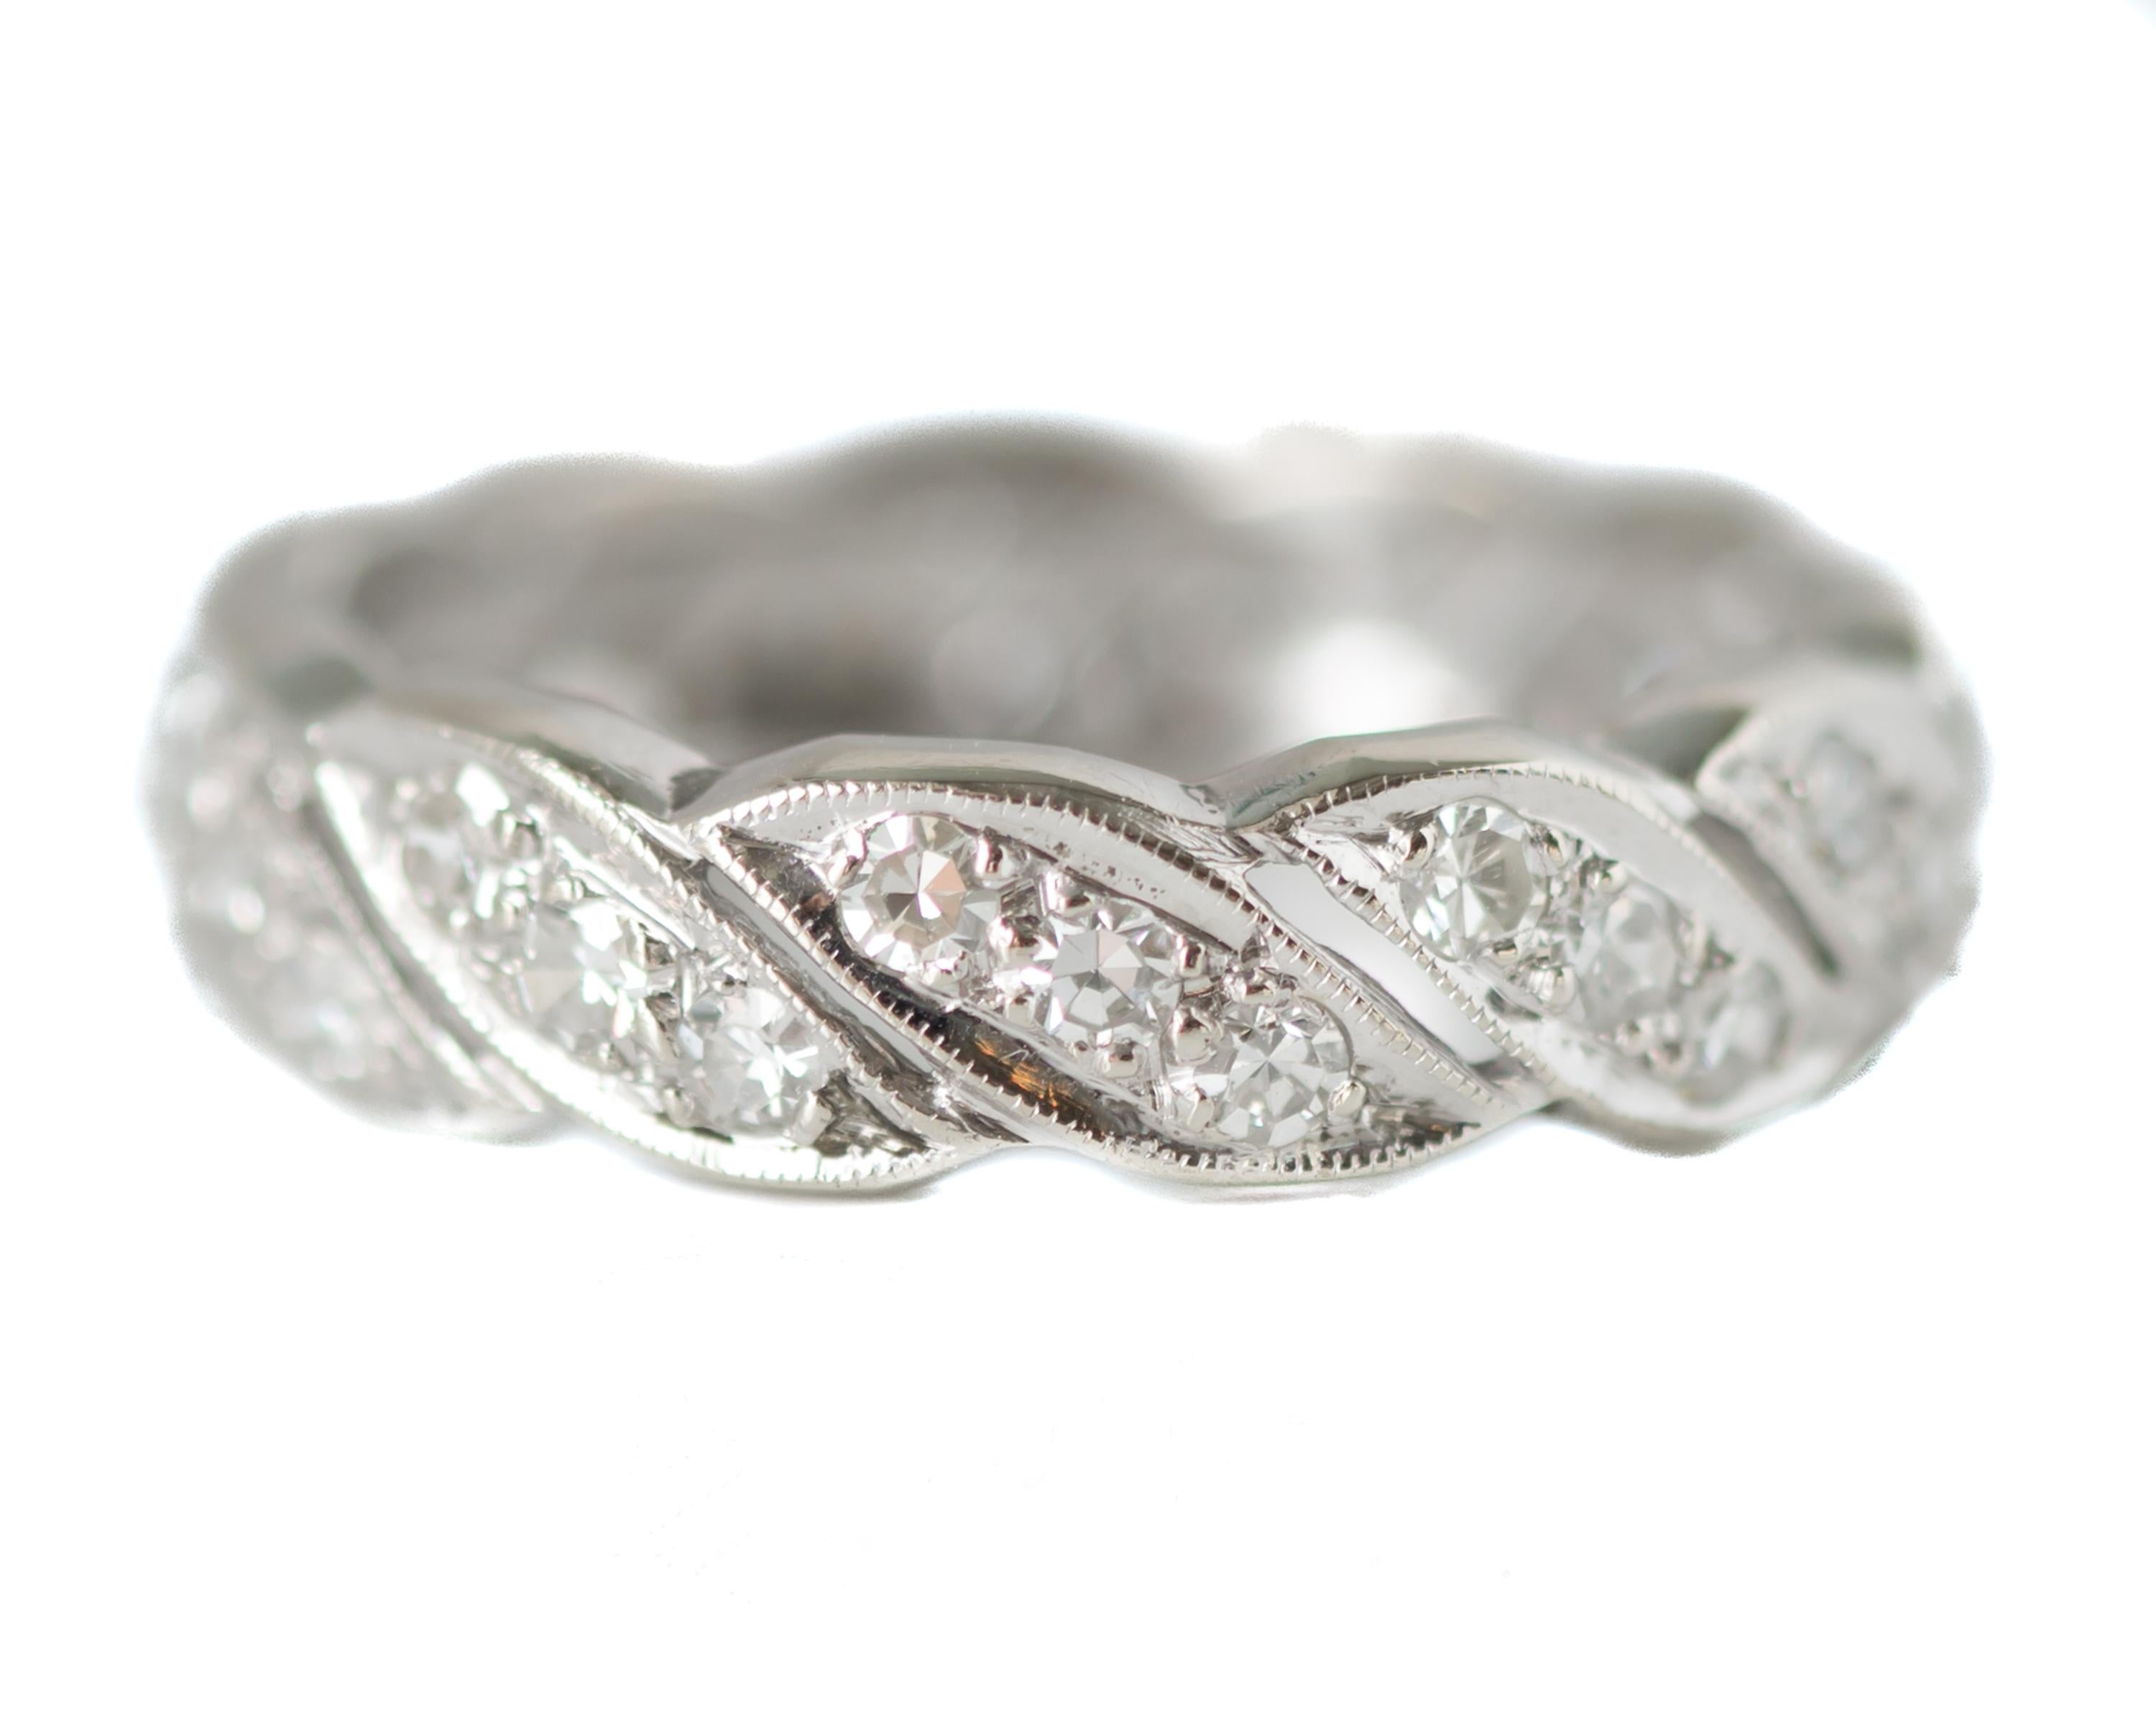 Diamond Wedding Band Anniversary Ring - 14 karat White Gold 

Features:
1.0 carat total Single cut Diamonds crafted in 14 karat White Gold setting
Diagonal Floral Leaf Design - Each Petal or Leaf holds 3 prong set Diamonds
Each segment is outlined